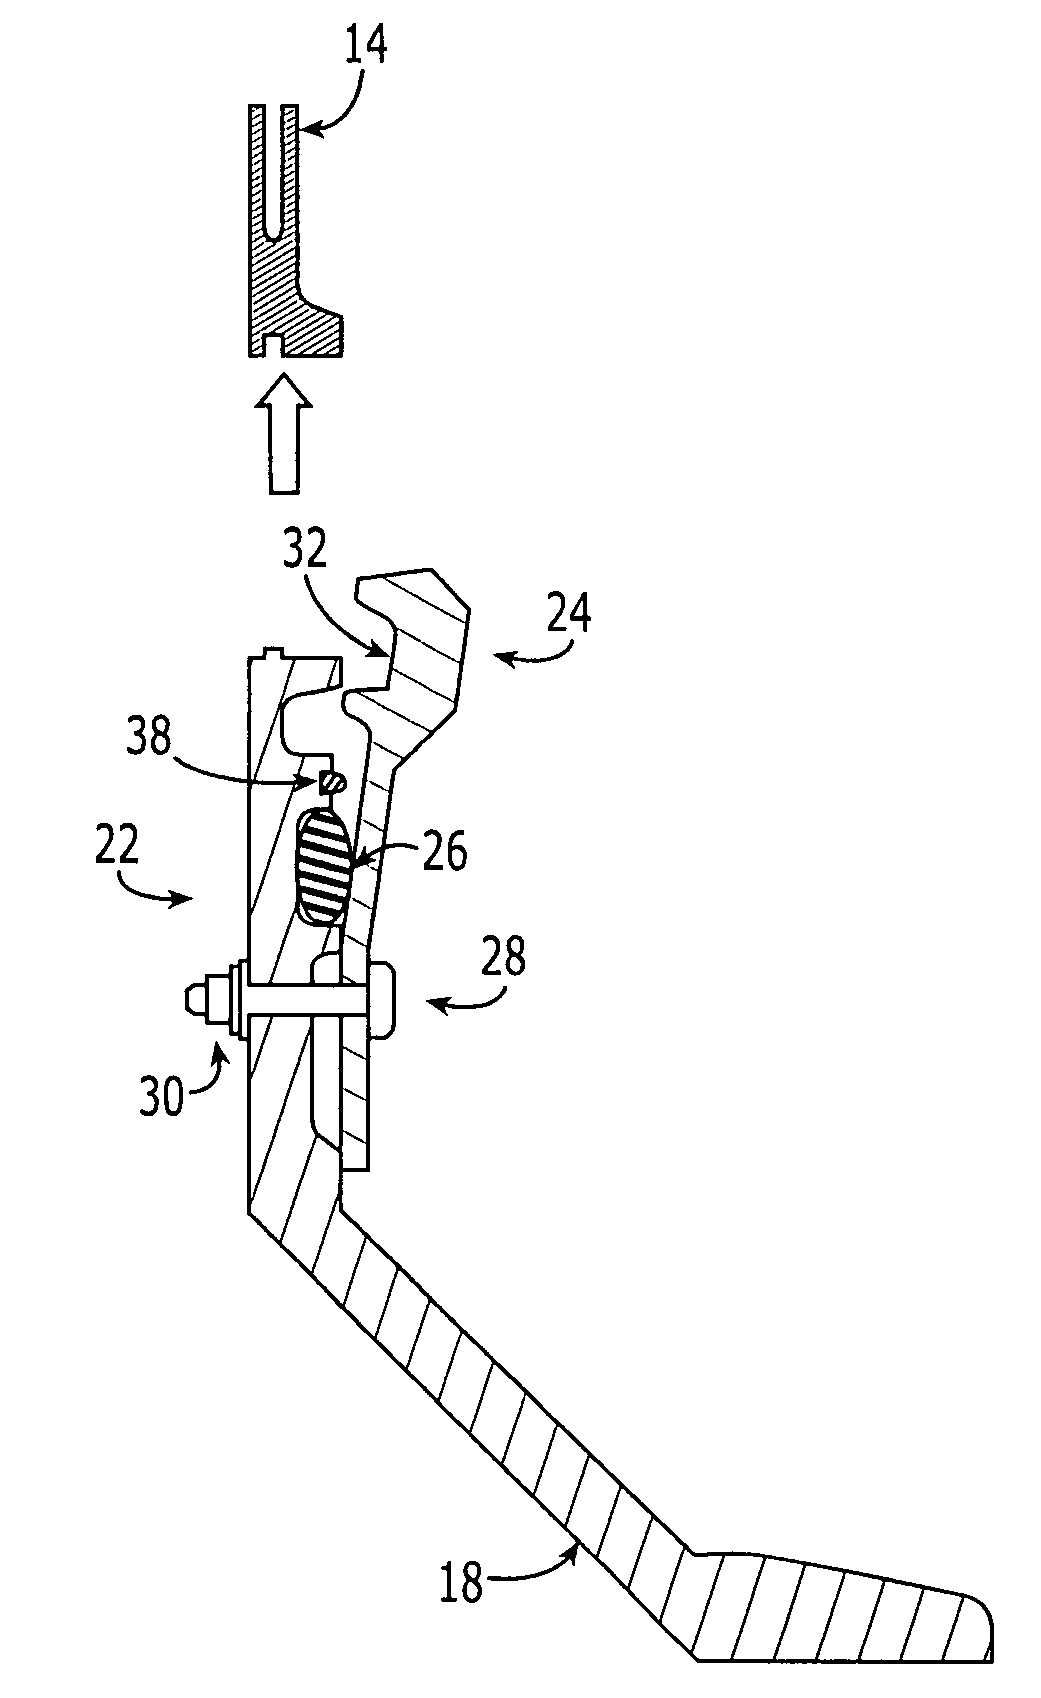 Apparatus and method for releaseably joining elements